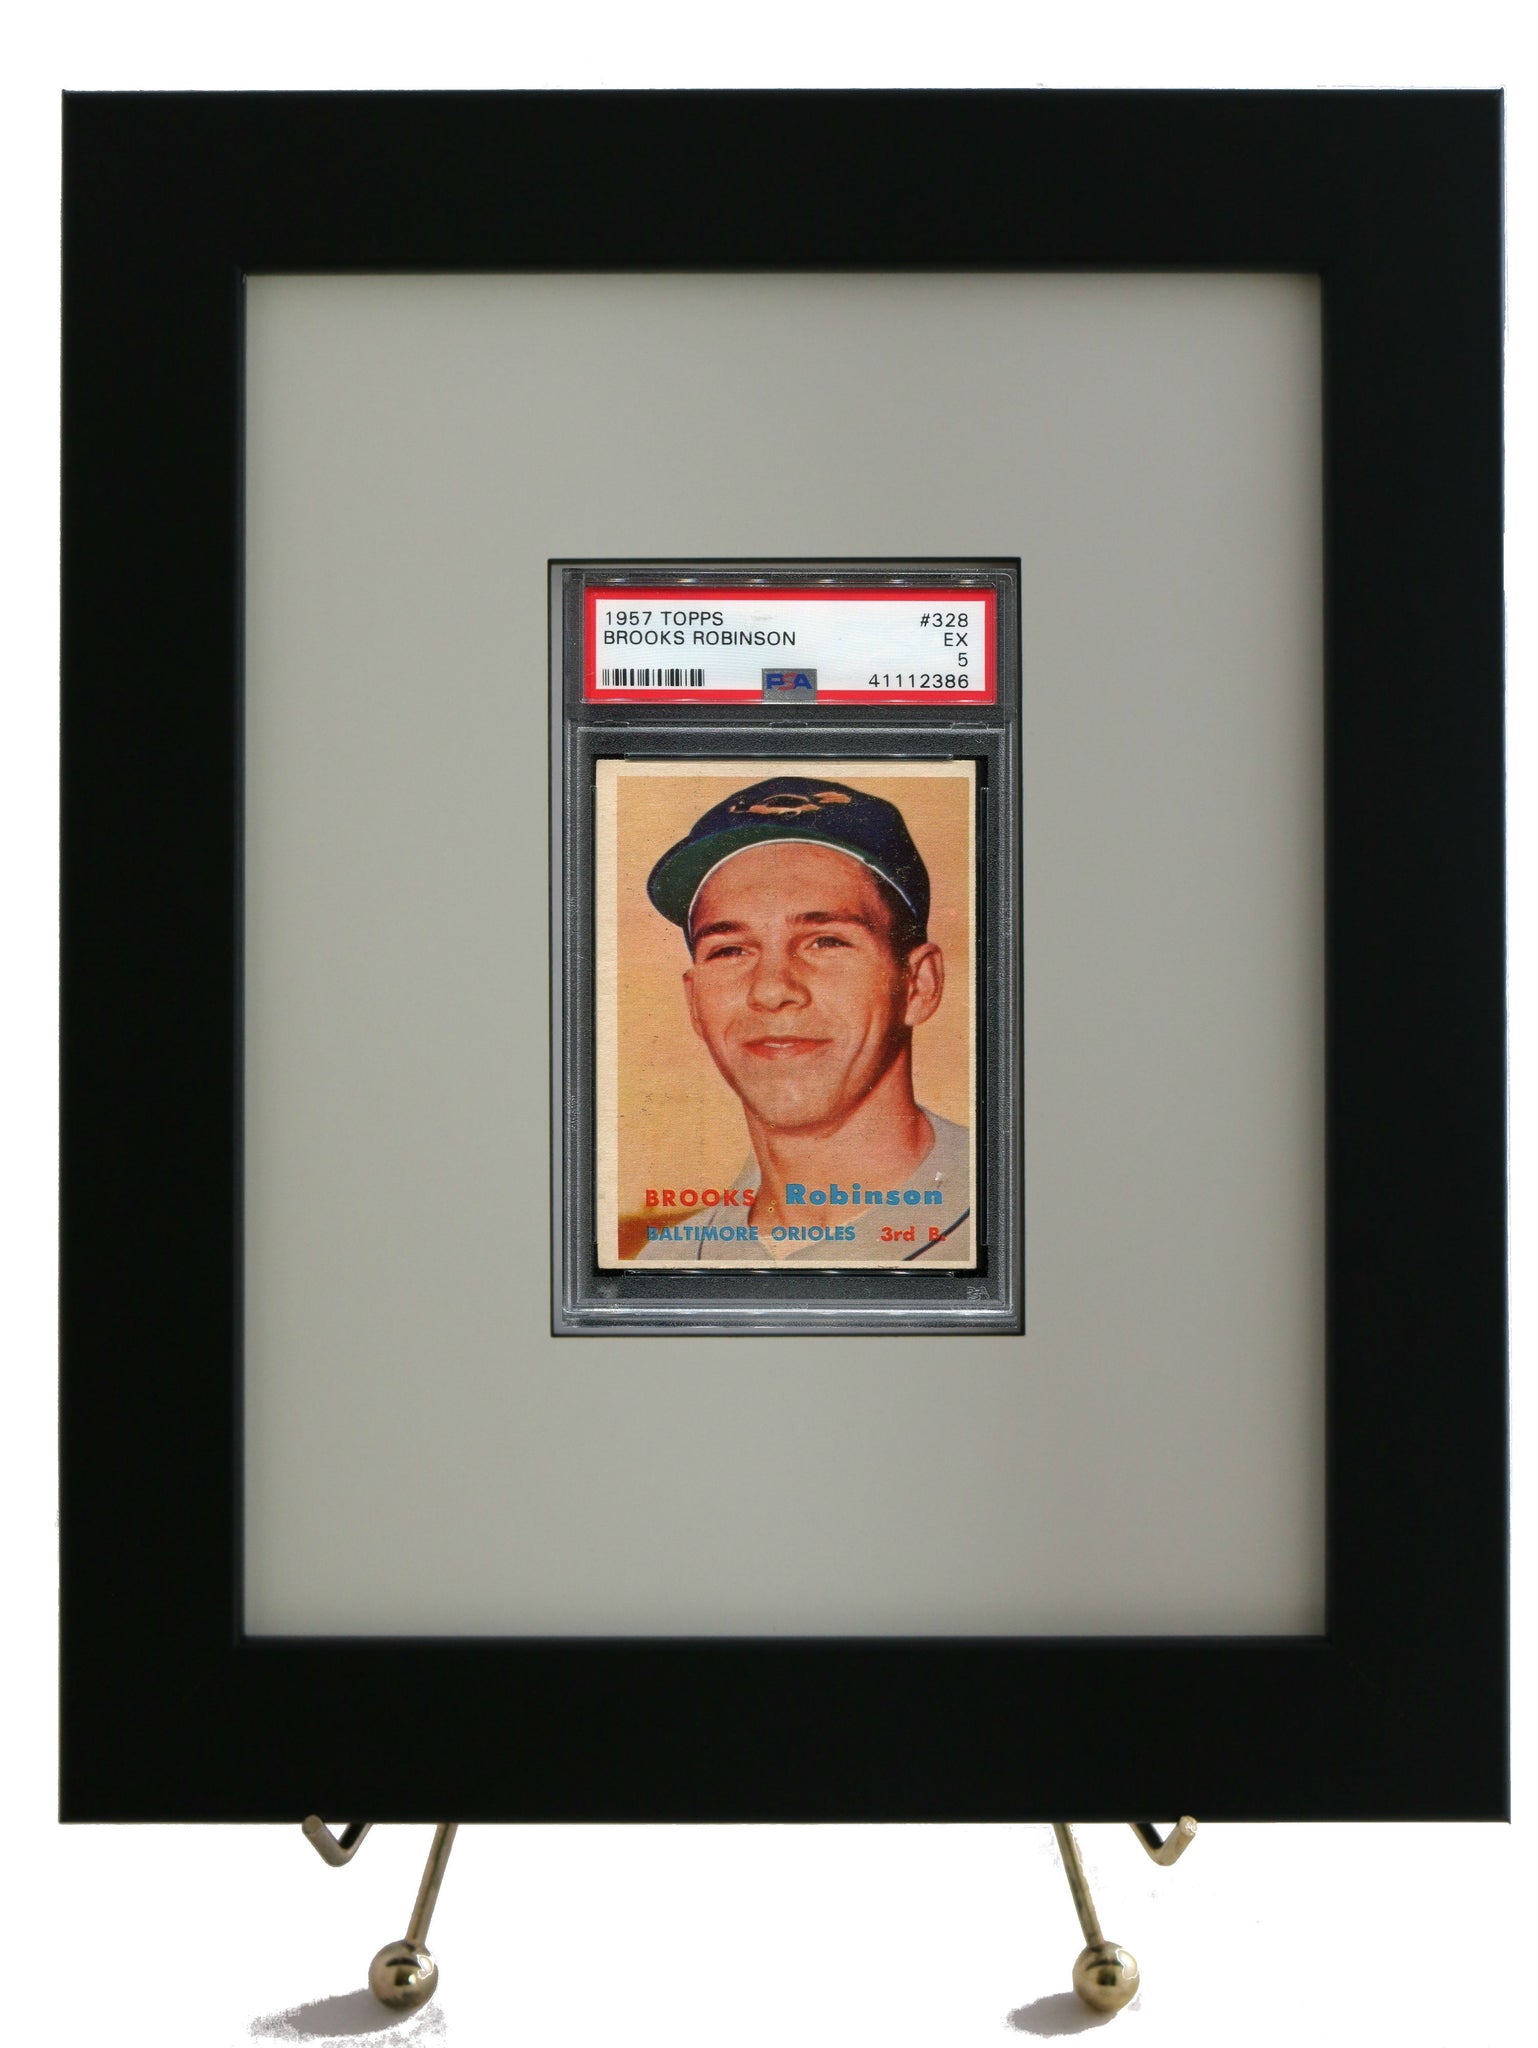 Graded Card Display for a PSA Graded Vertical Card (NEW 8x10 size) - Graded And Framed